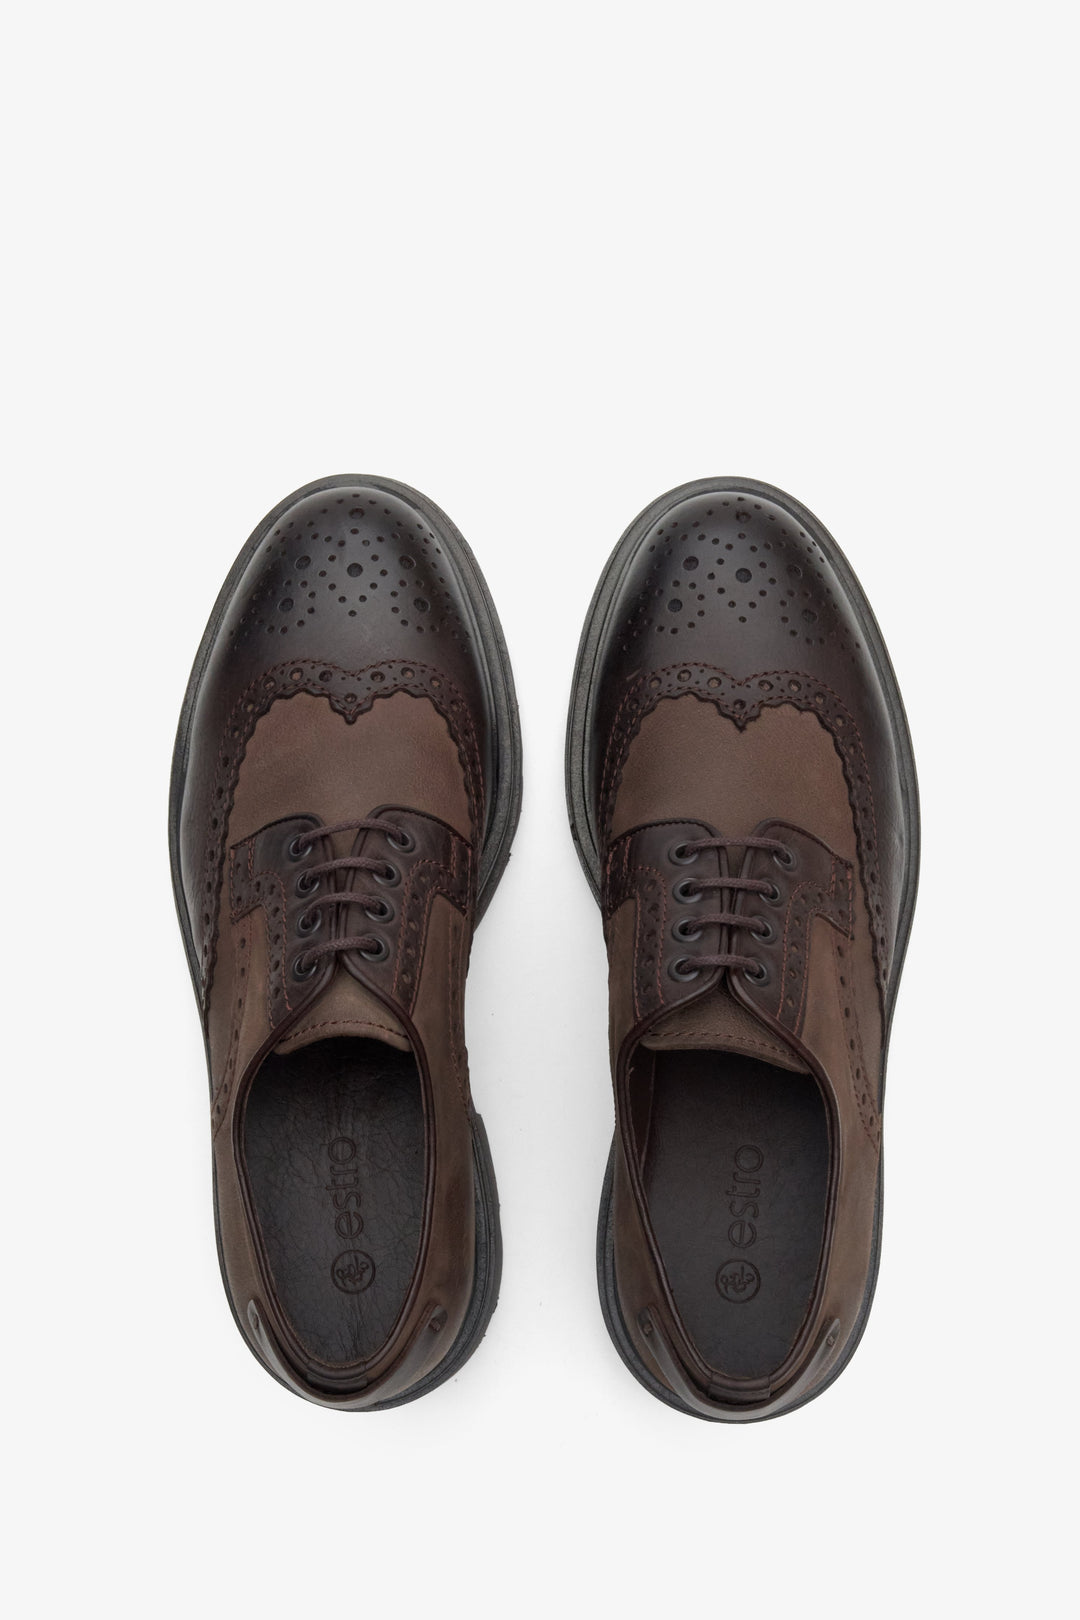 Men's brown leather oxford shoes by Estro - top view presentation.